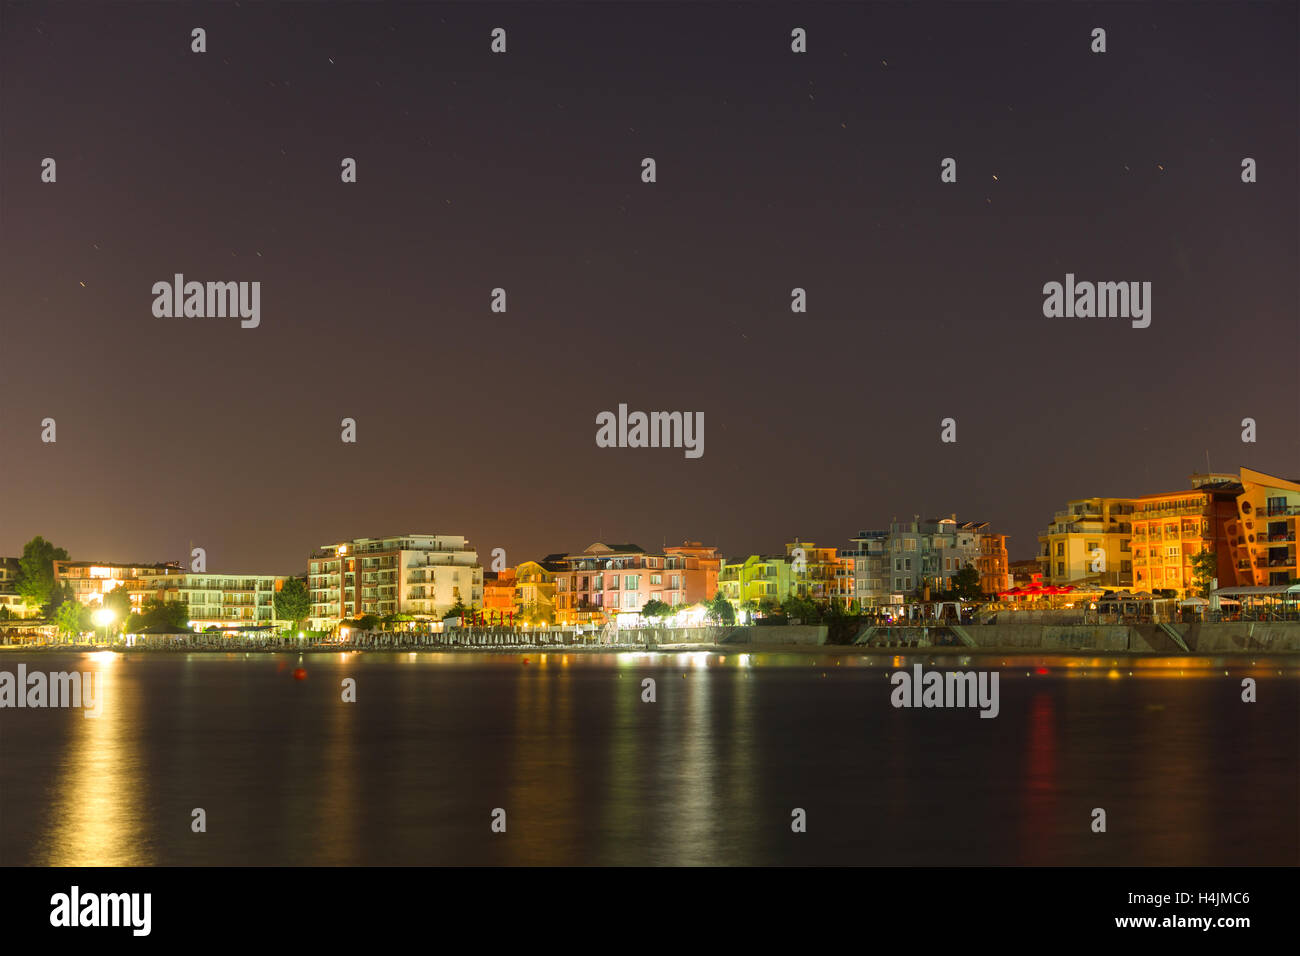 Sea view from the city at night with colored lights Stock Photo